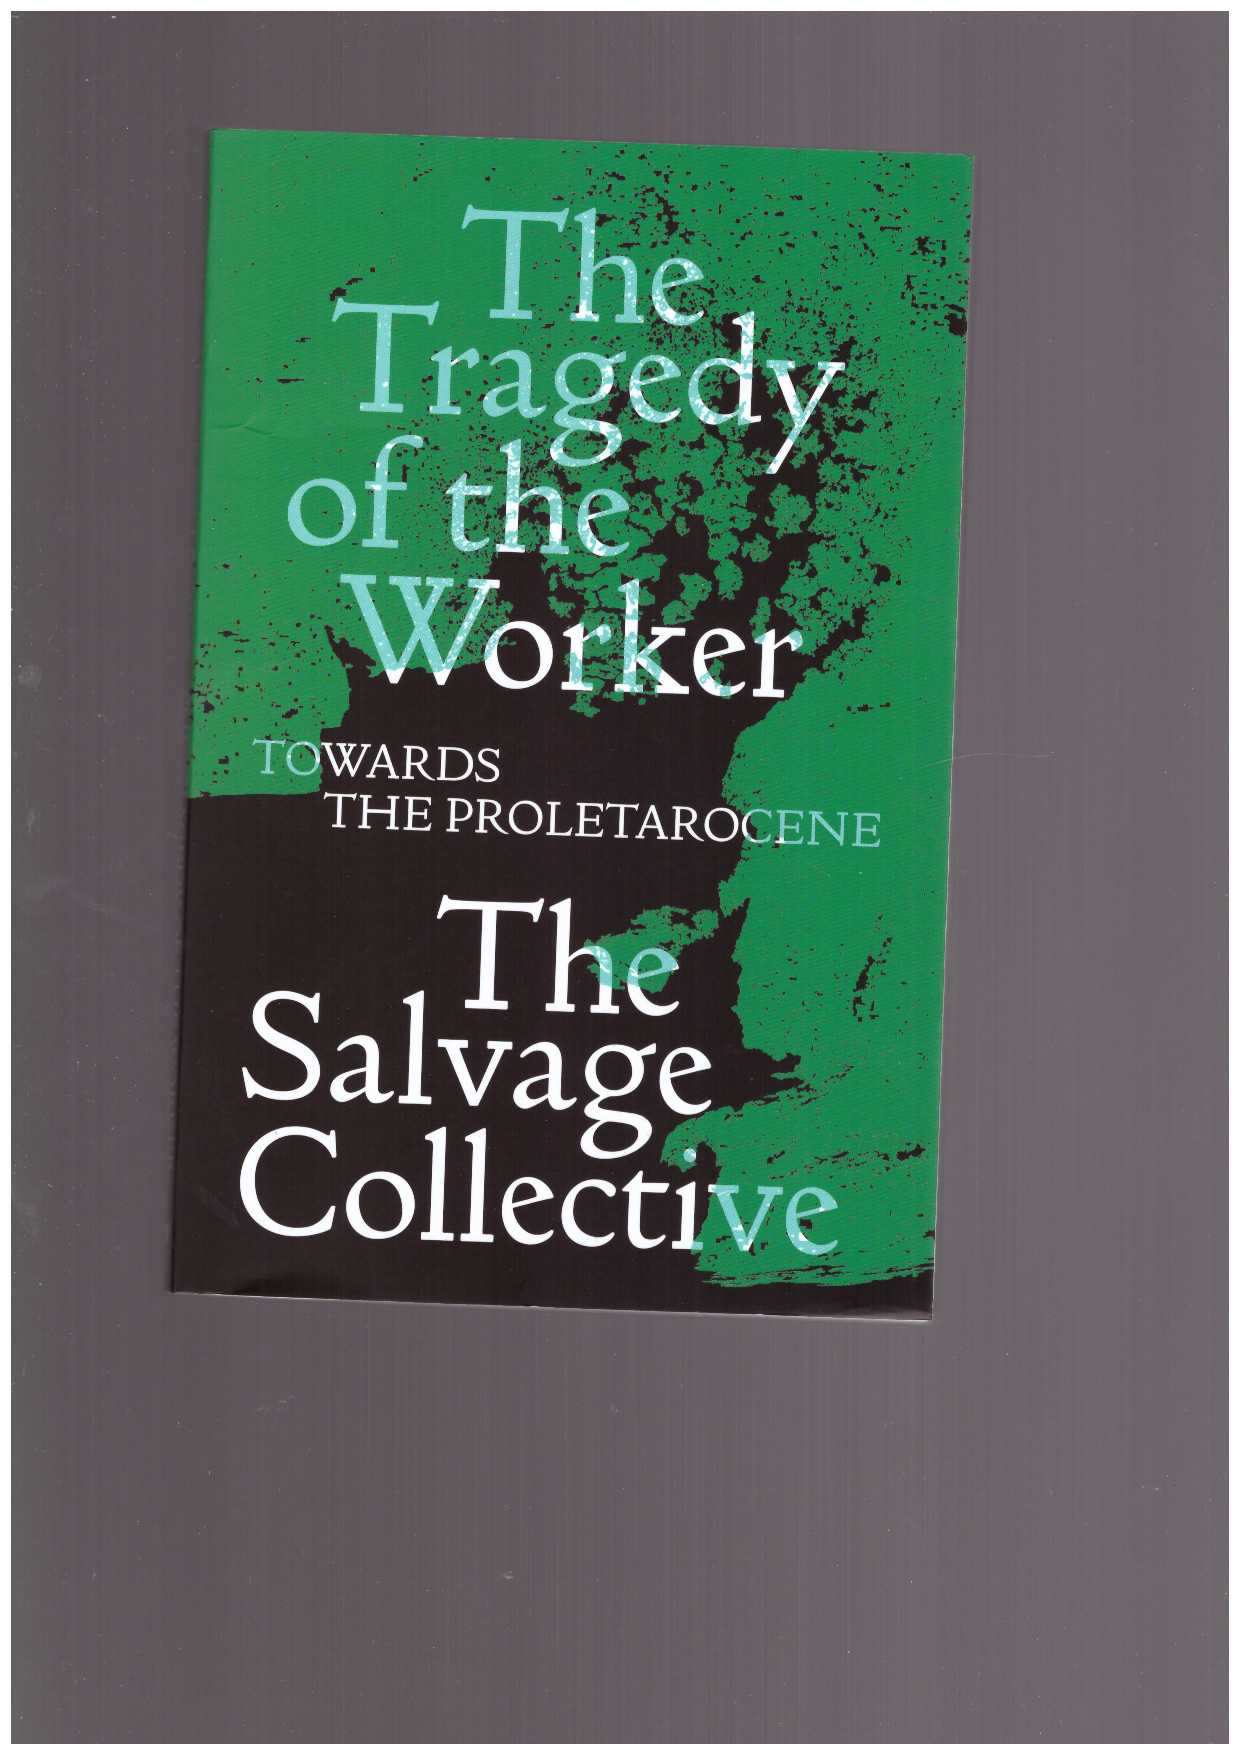 SALVAGE COLLECTIVE, The - The Tragedy of the Worker. Towards the Proletarocene